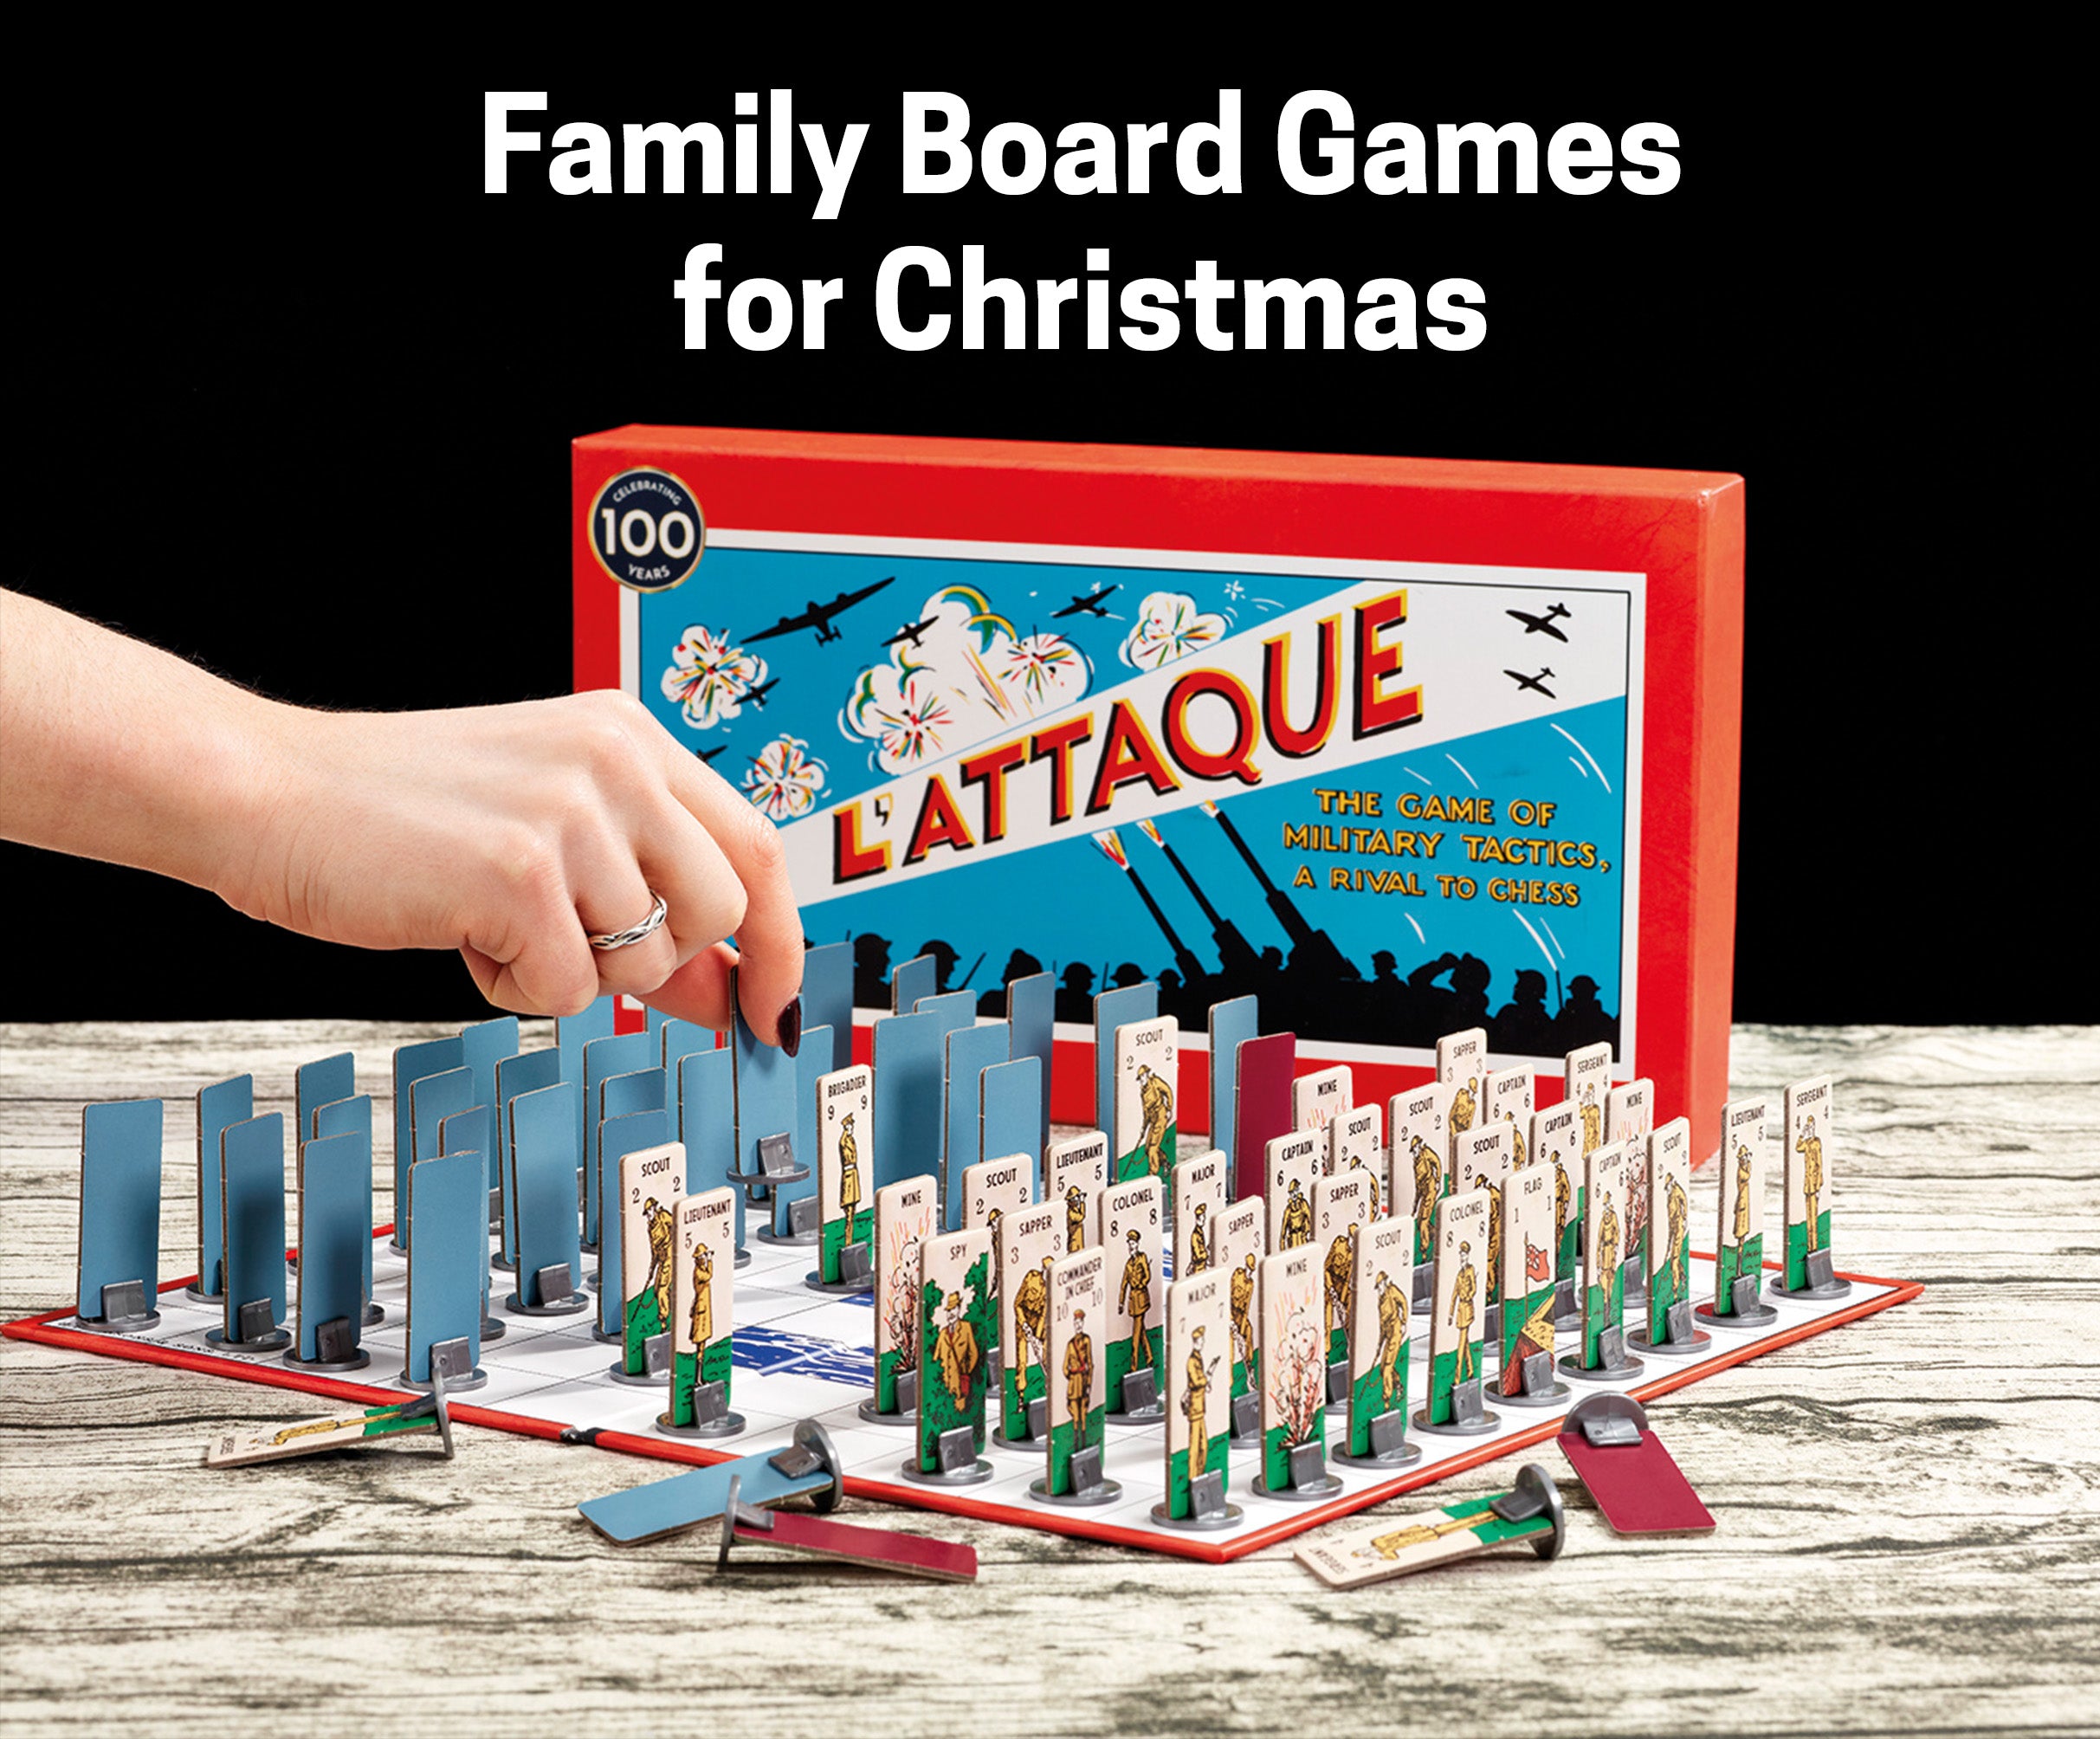 Our Family Board Games